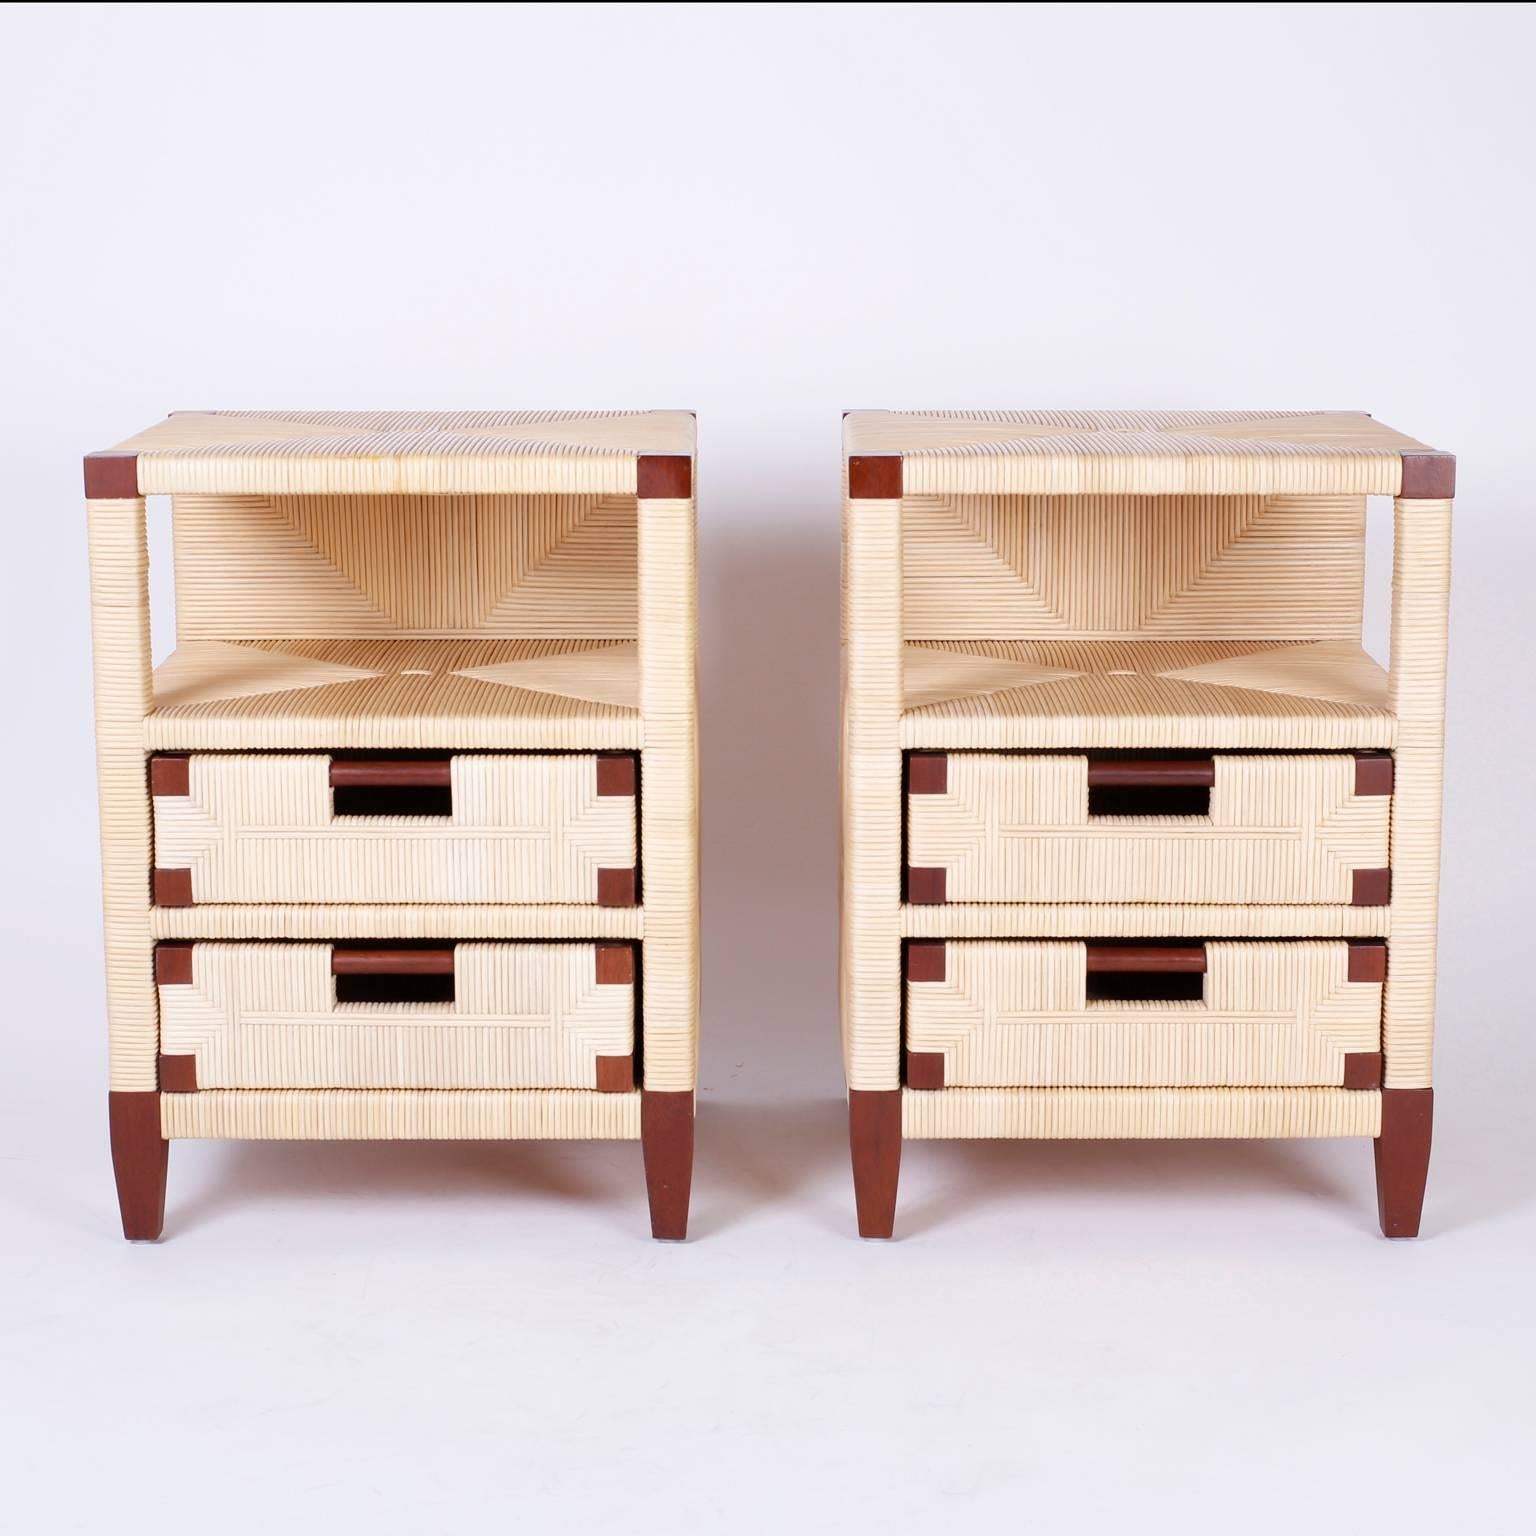 Handsome pair of nightstands with two drawers and book storage constructed with mahogany wrapped in geometric patterned reed. Having tapered legs and finished on the back Merbau collection designed by John Hutton. Branded Donghia on the bottom.